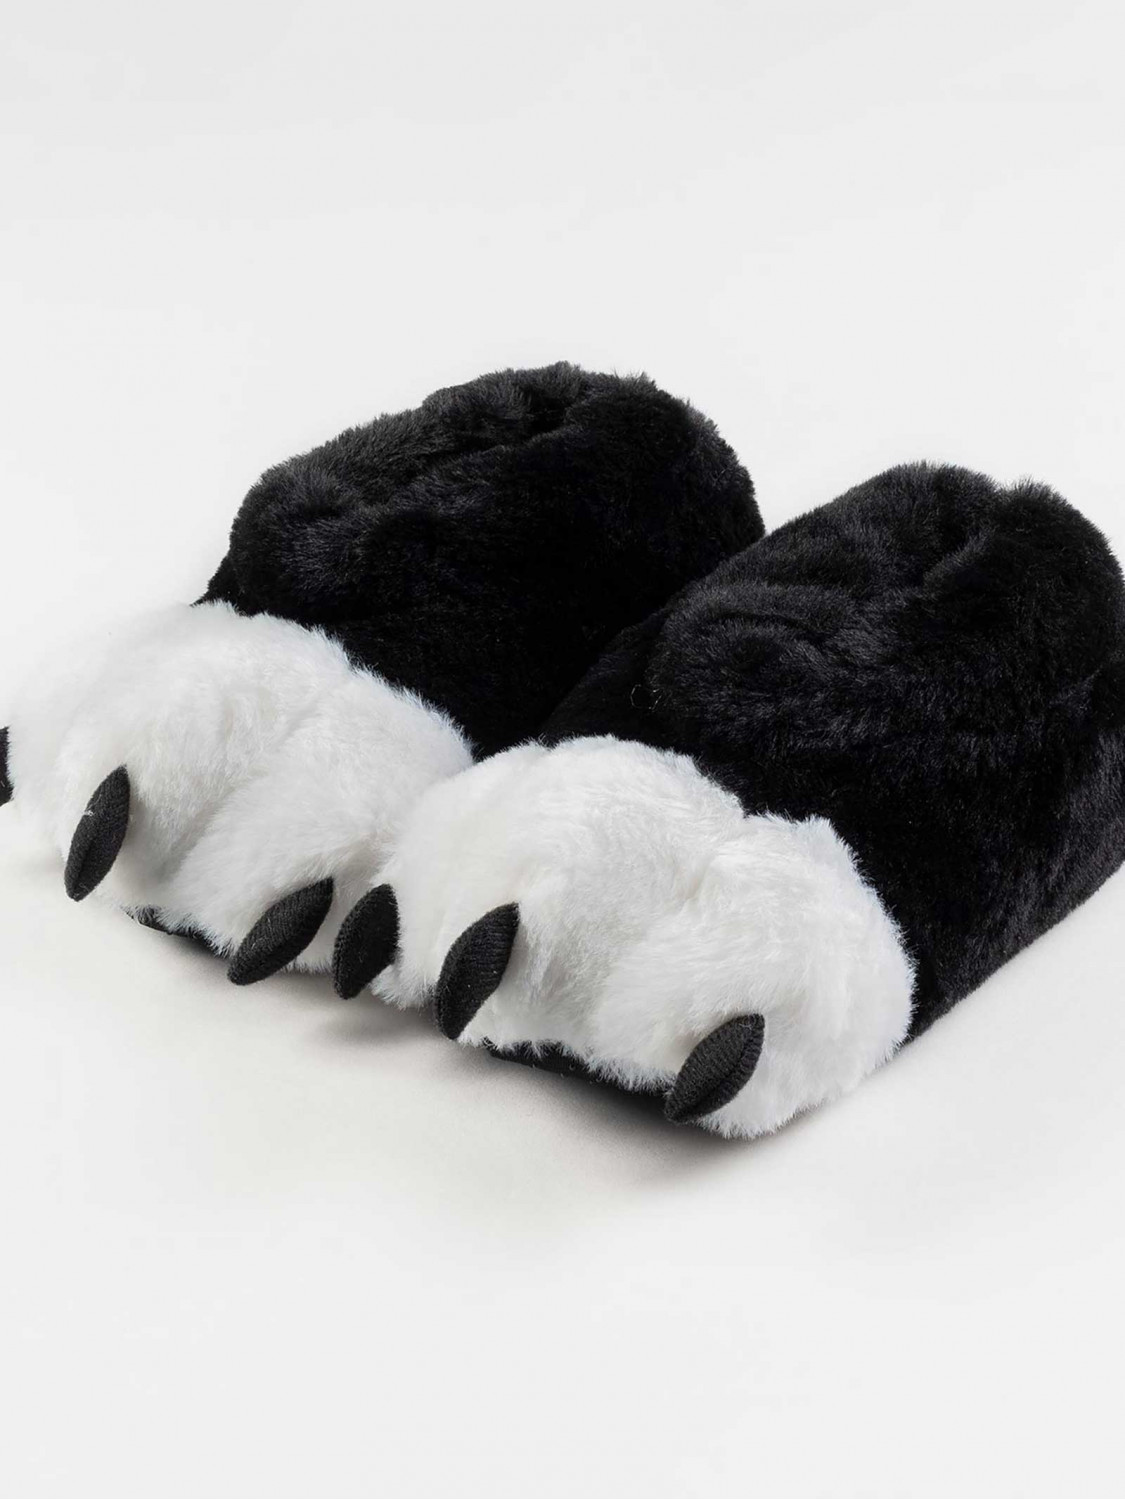 Bear Paw Slippers For Women, Soft, Foldable, Non-Slip Texture, Warm And  Cozy | SHEIN USA